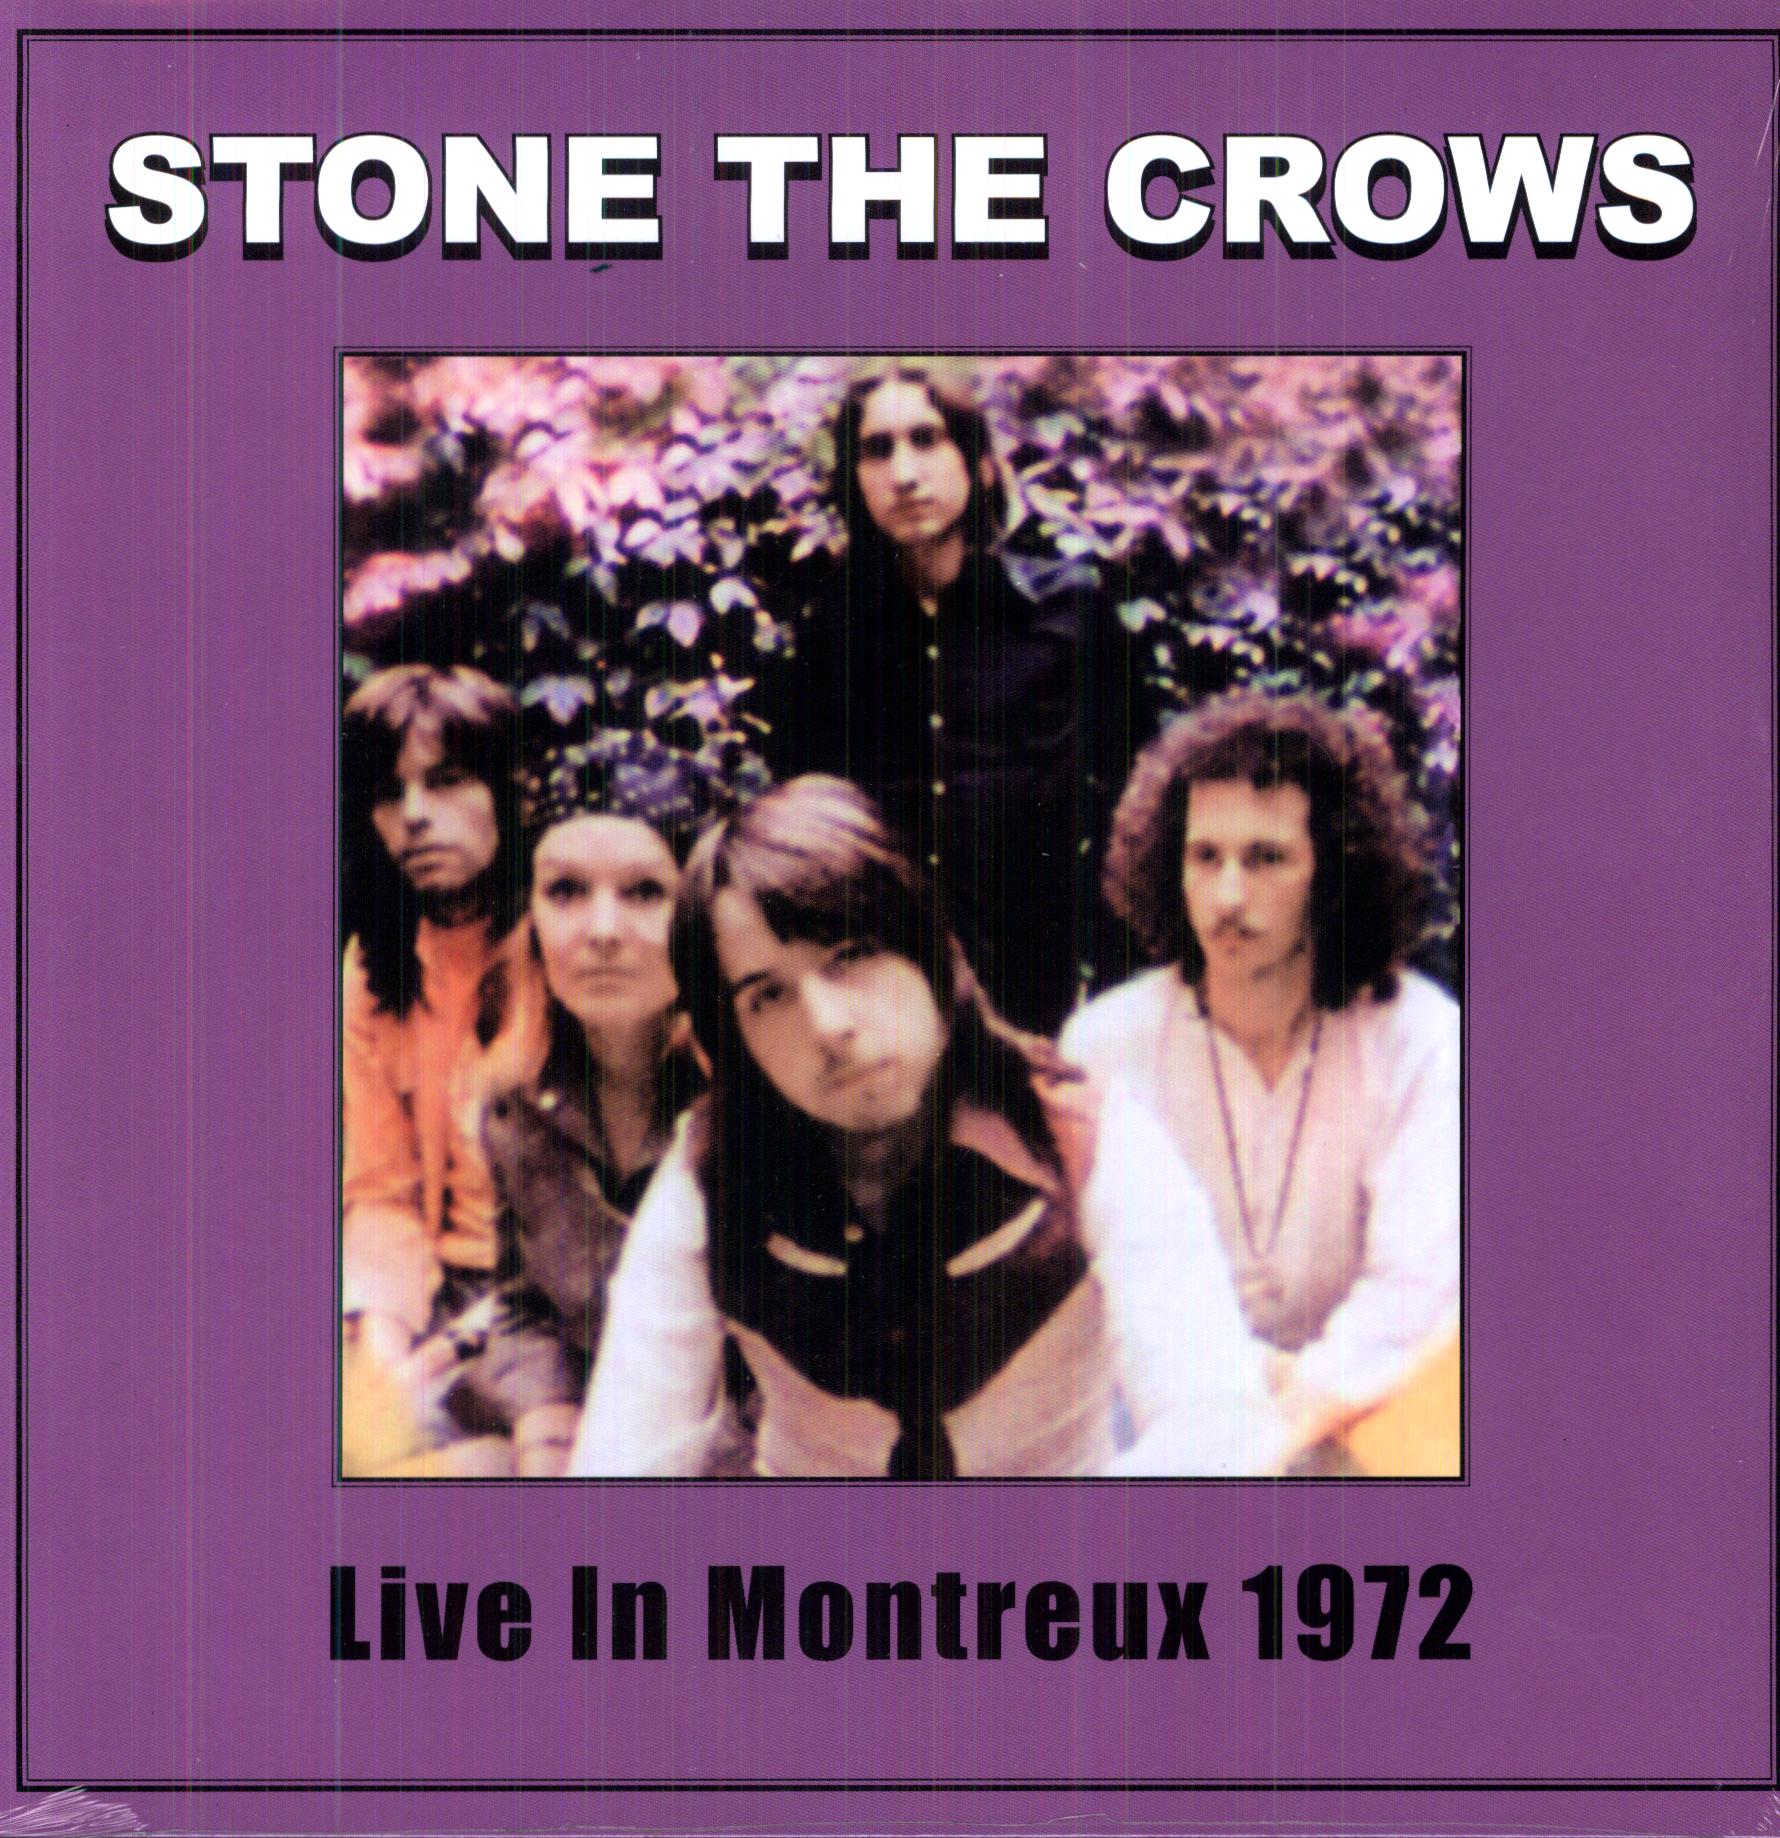 LIVE IN MONTREUX 1972